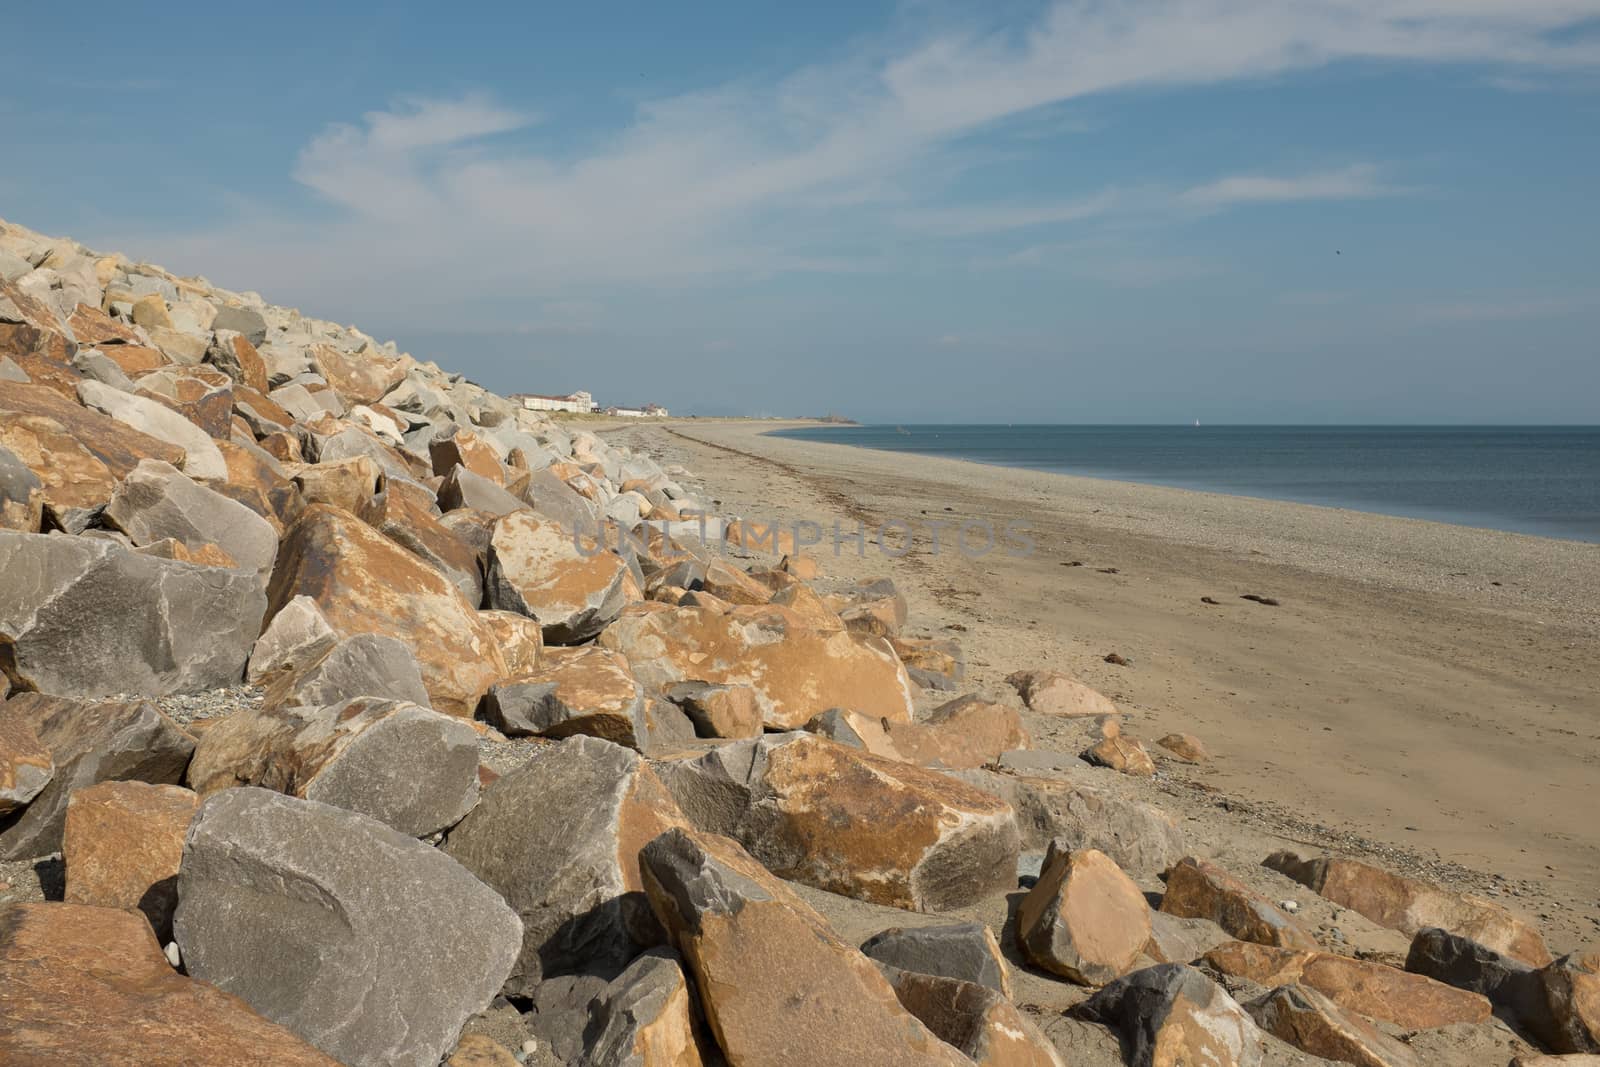 A wall of rocks act as the sea defence on a sandy beach with the sea and blue sky in the distance.